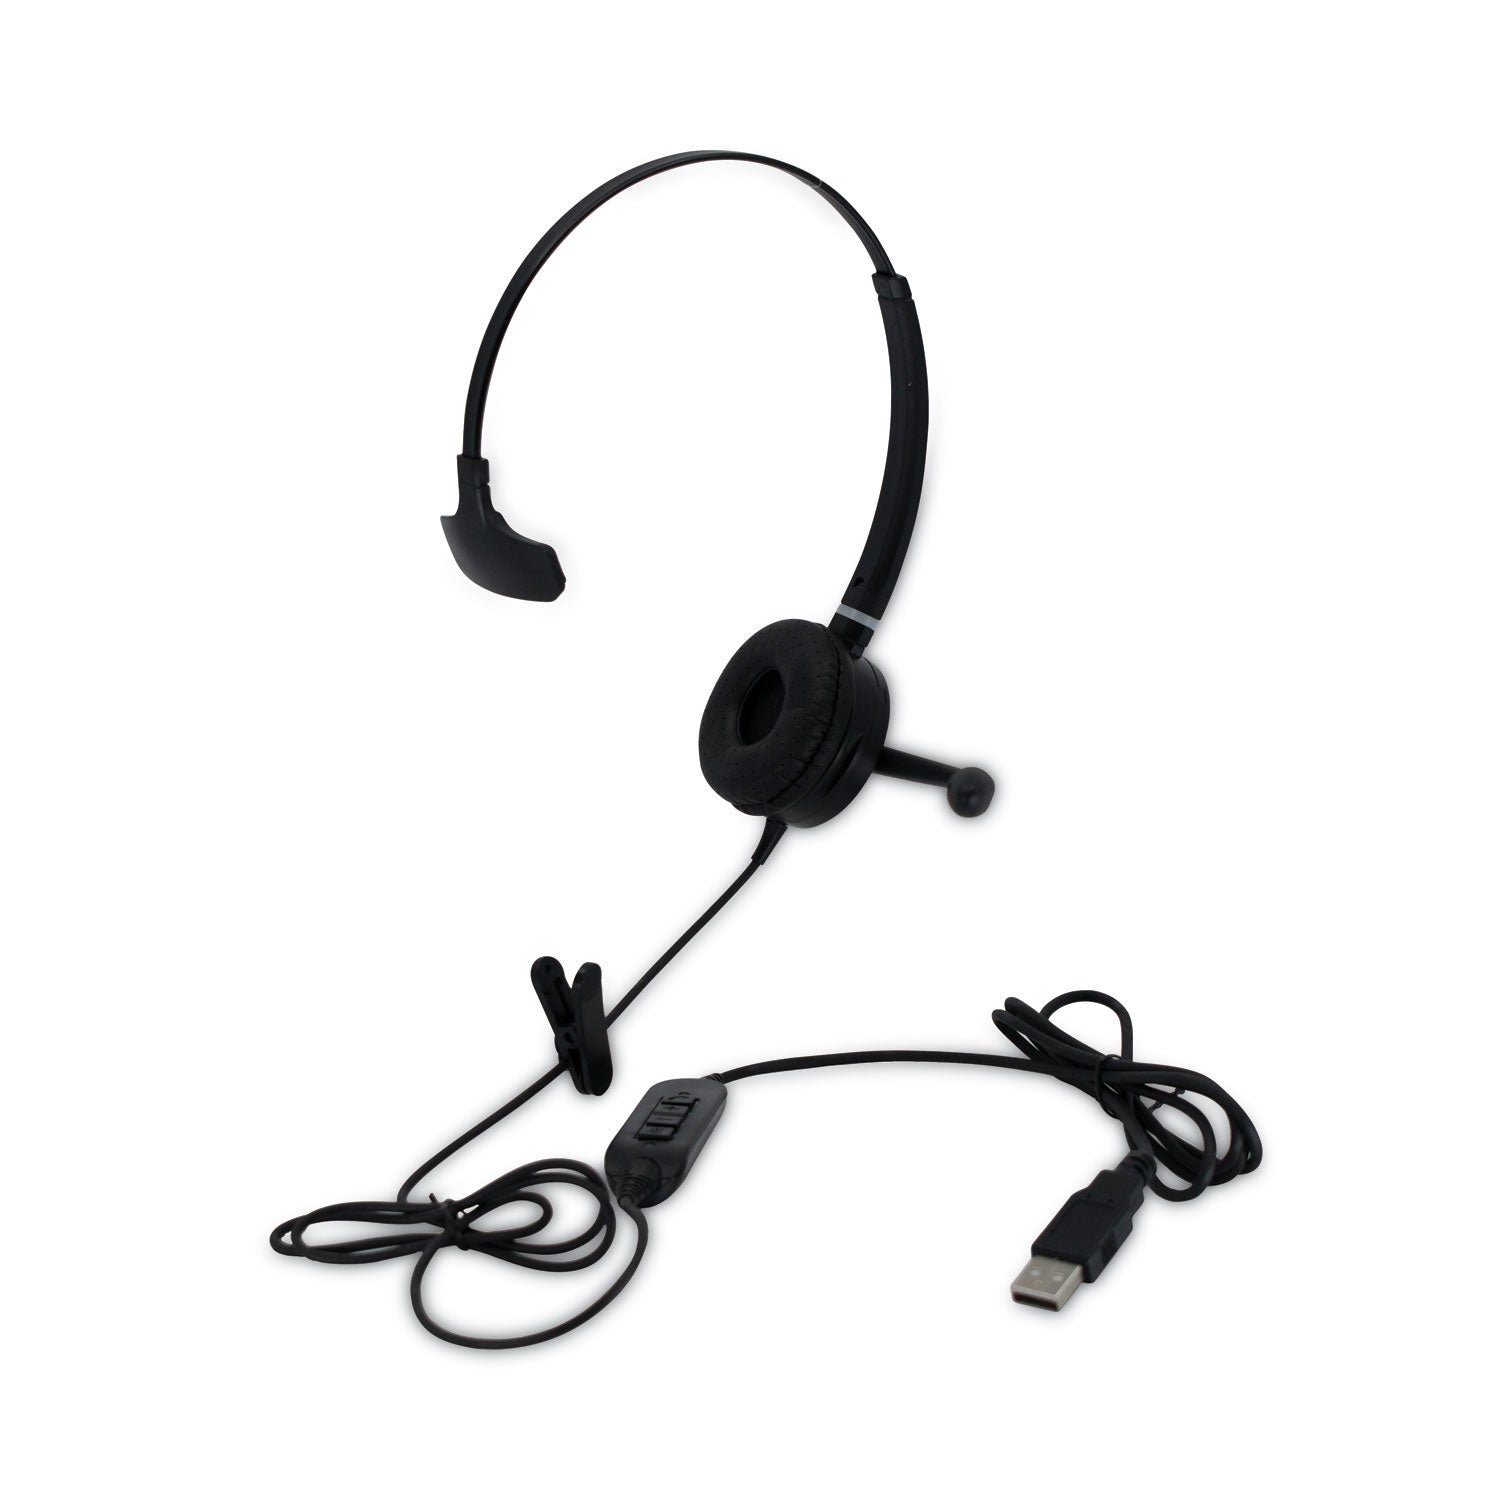 hs-wd-usb-1-monaural-over-the-head-headset-black_spthswdusb1 - 1